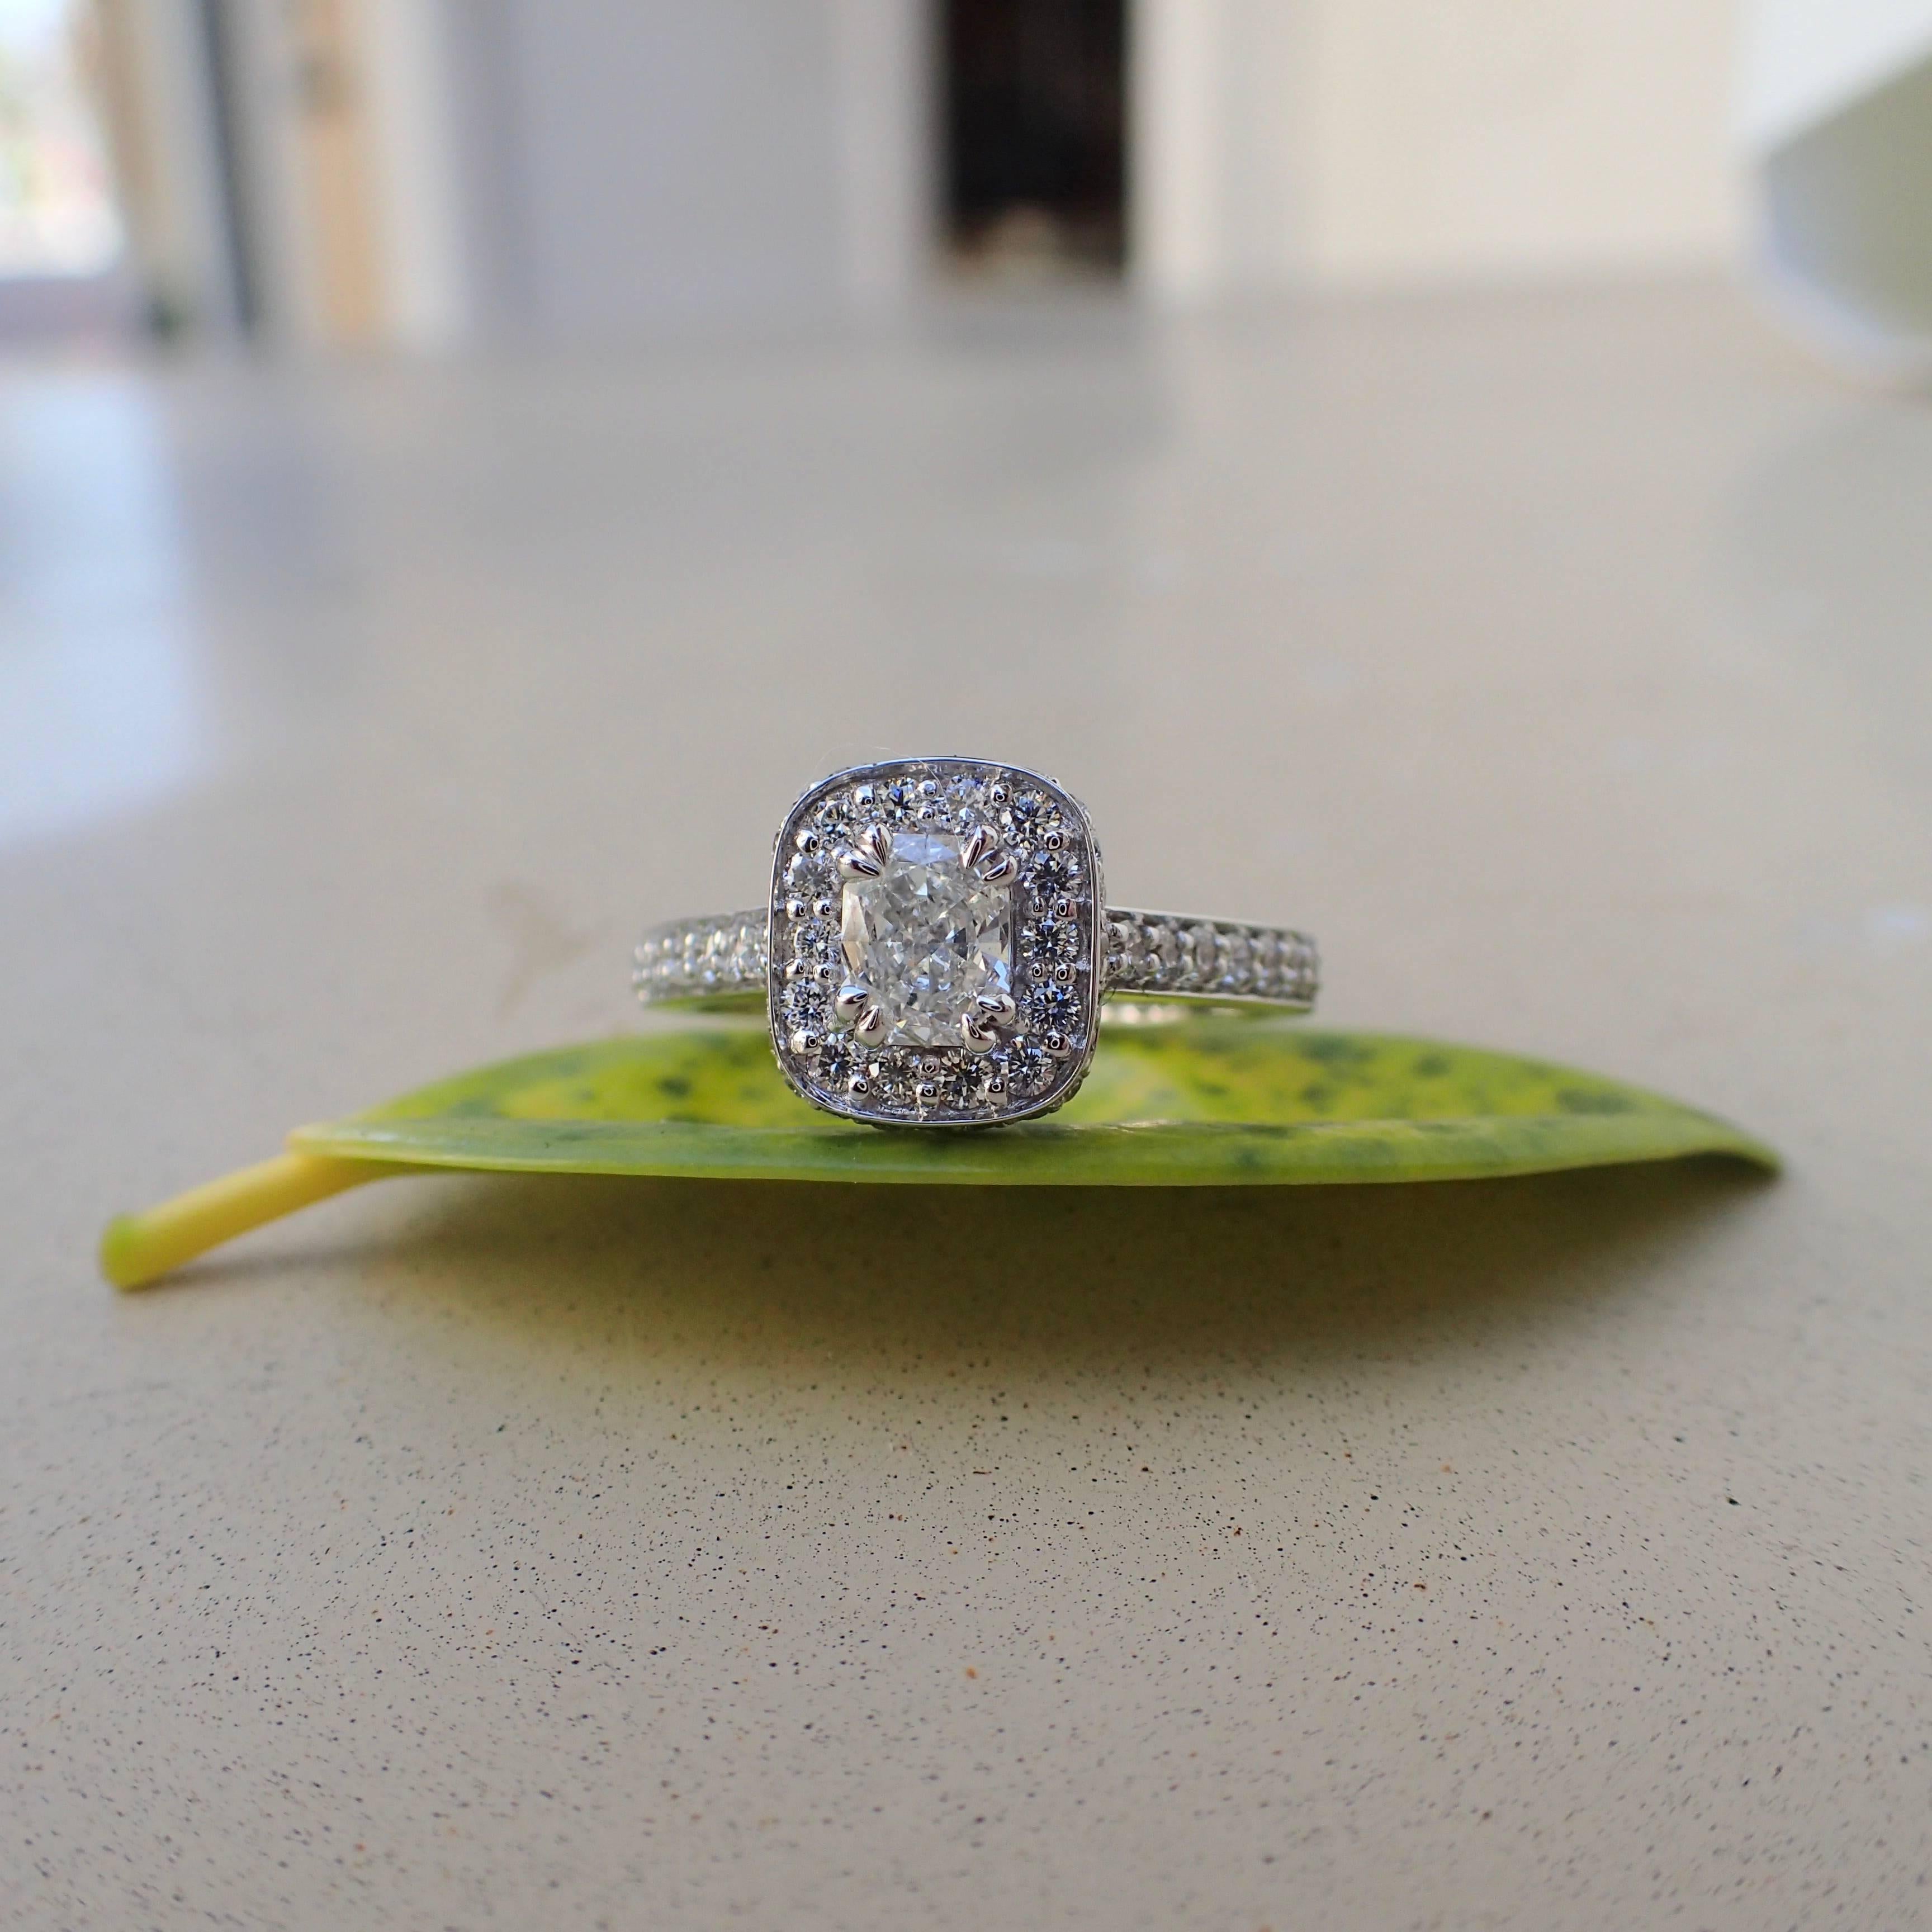 0.81 Carats of Diamond - 18k White Gold Radiant Cut Engagement Ring with Halo For Sale 3